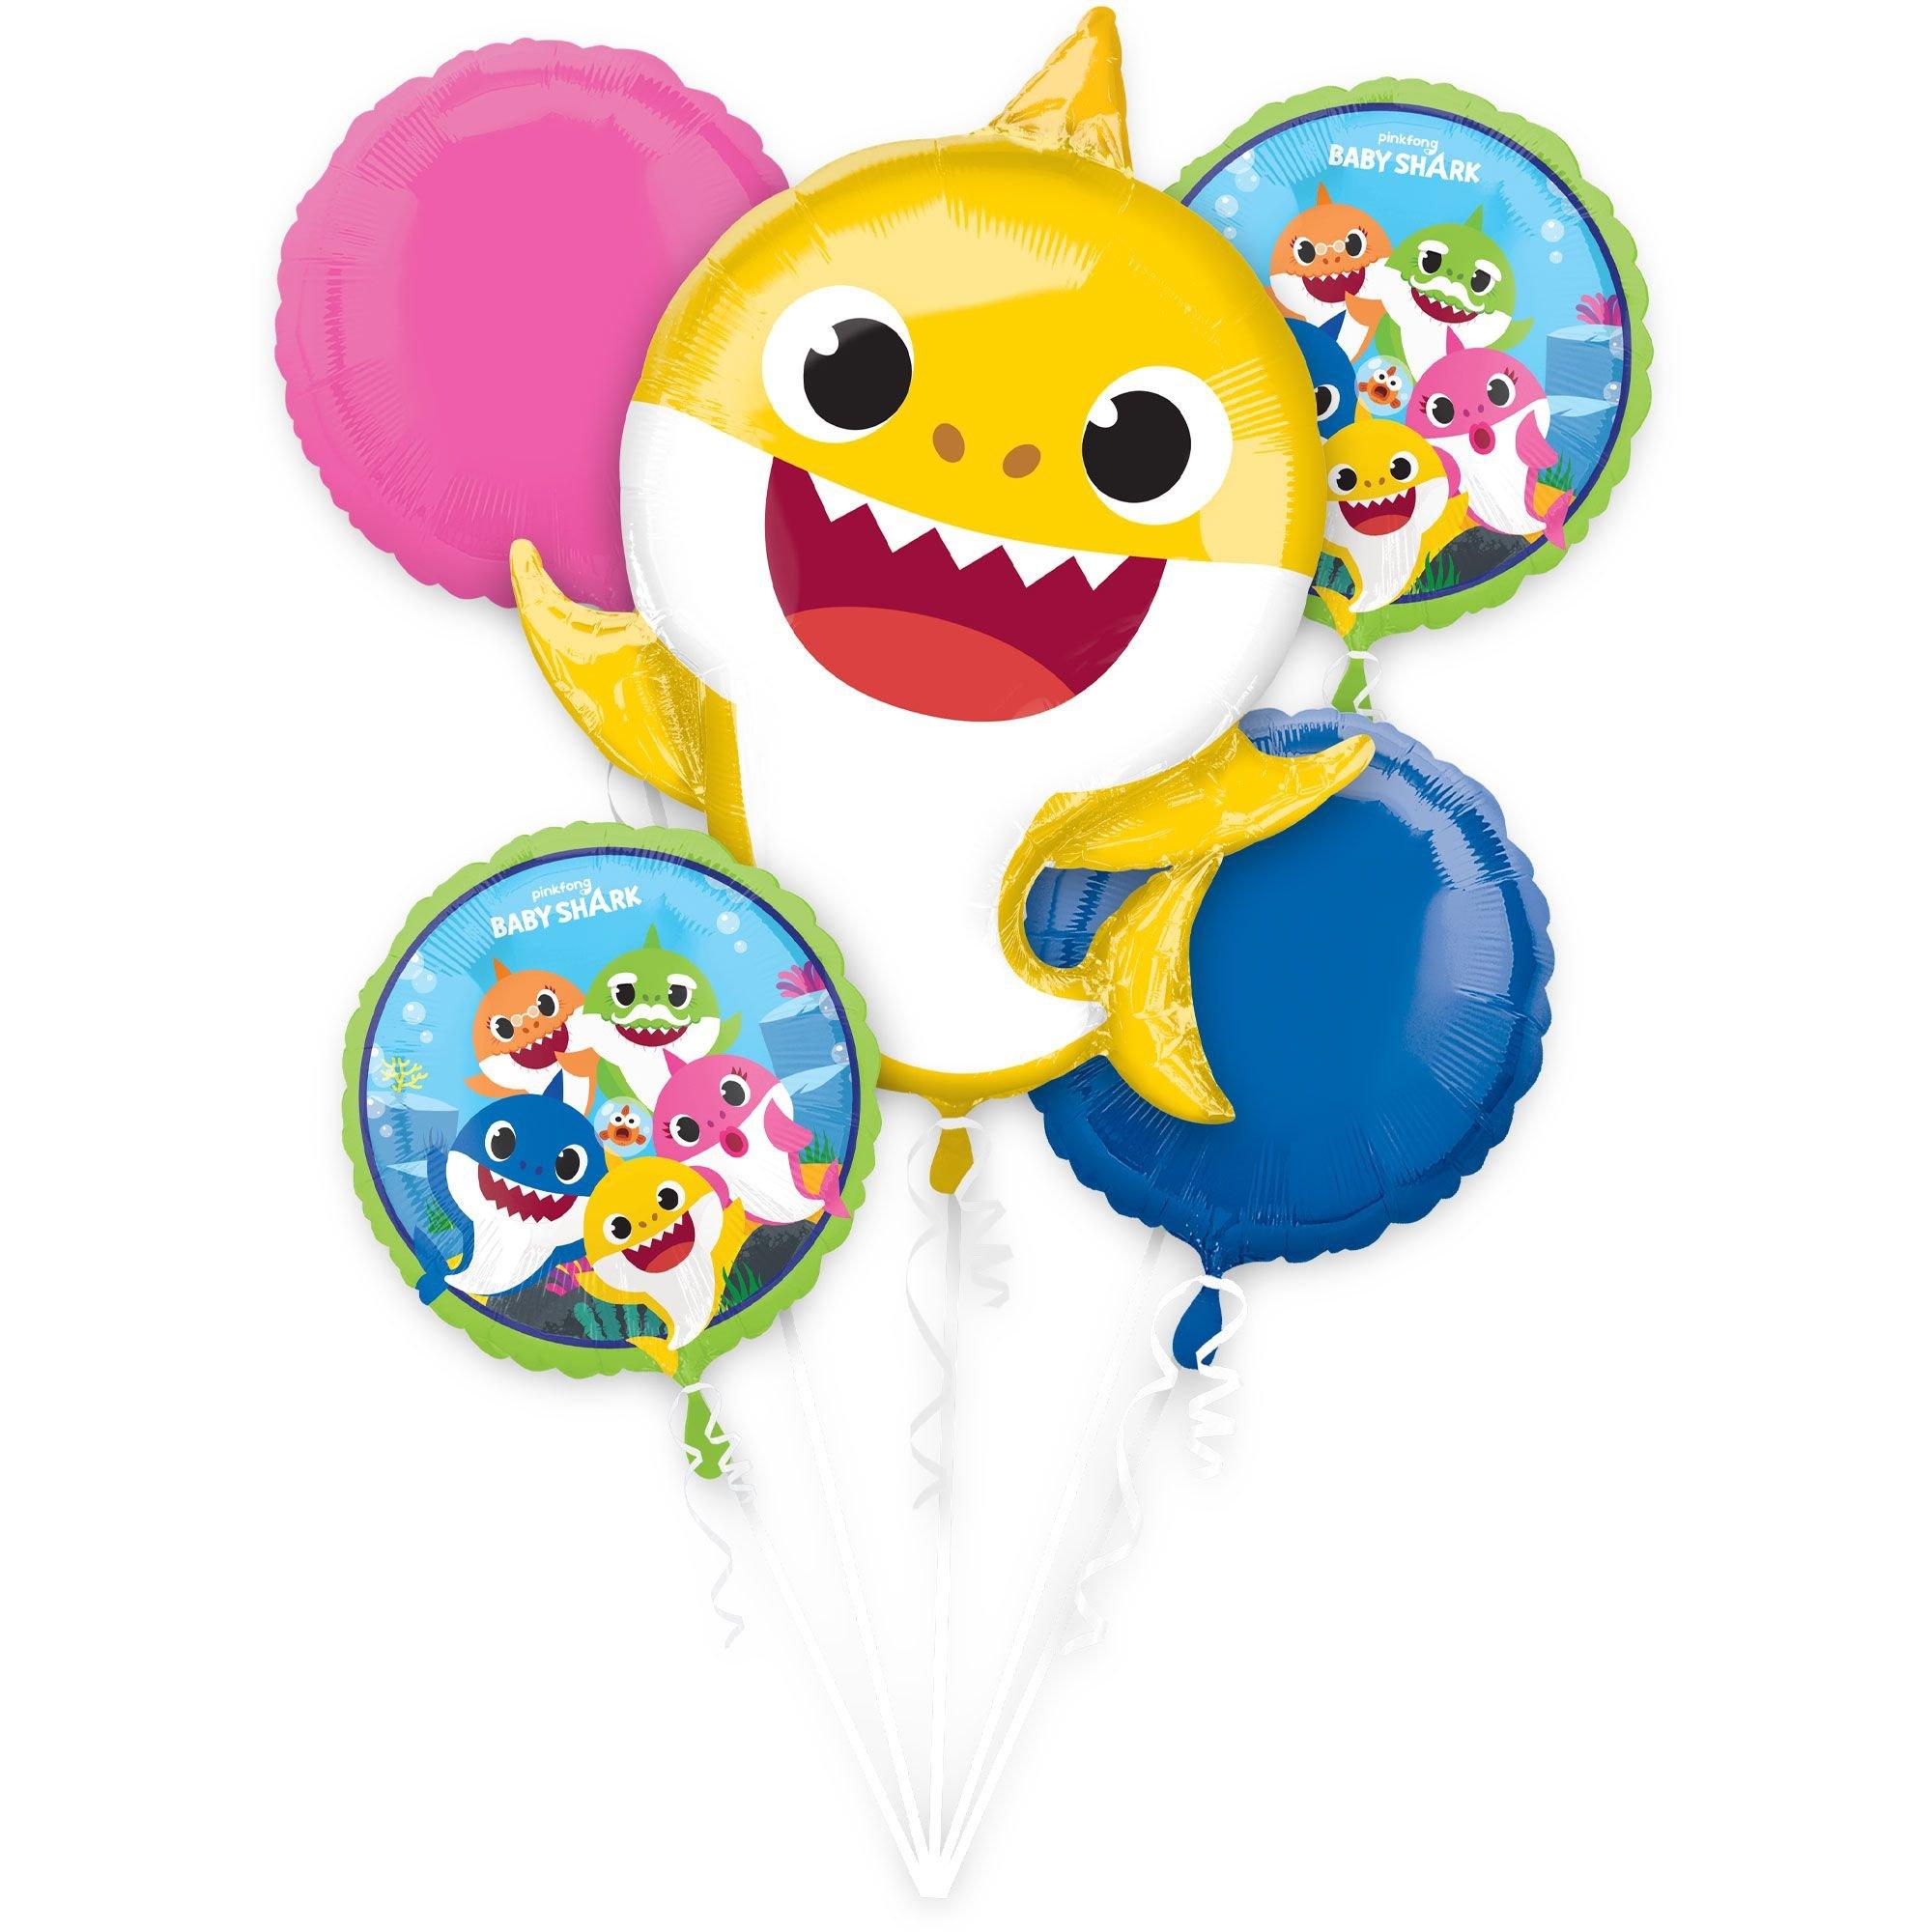 Baby Shark Birthday Party Supplies & Decorations